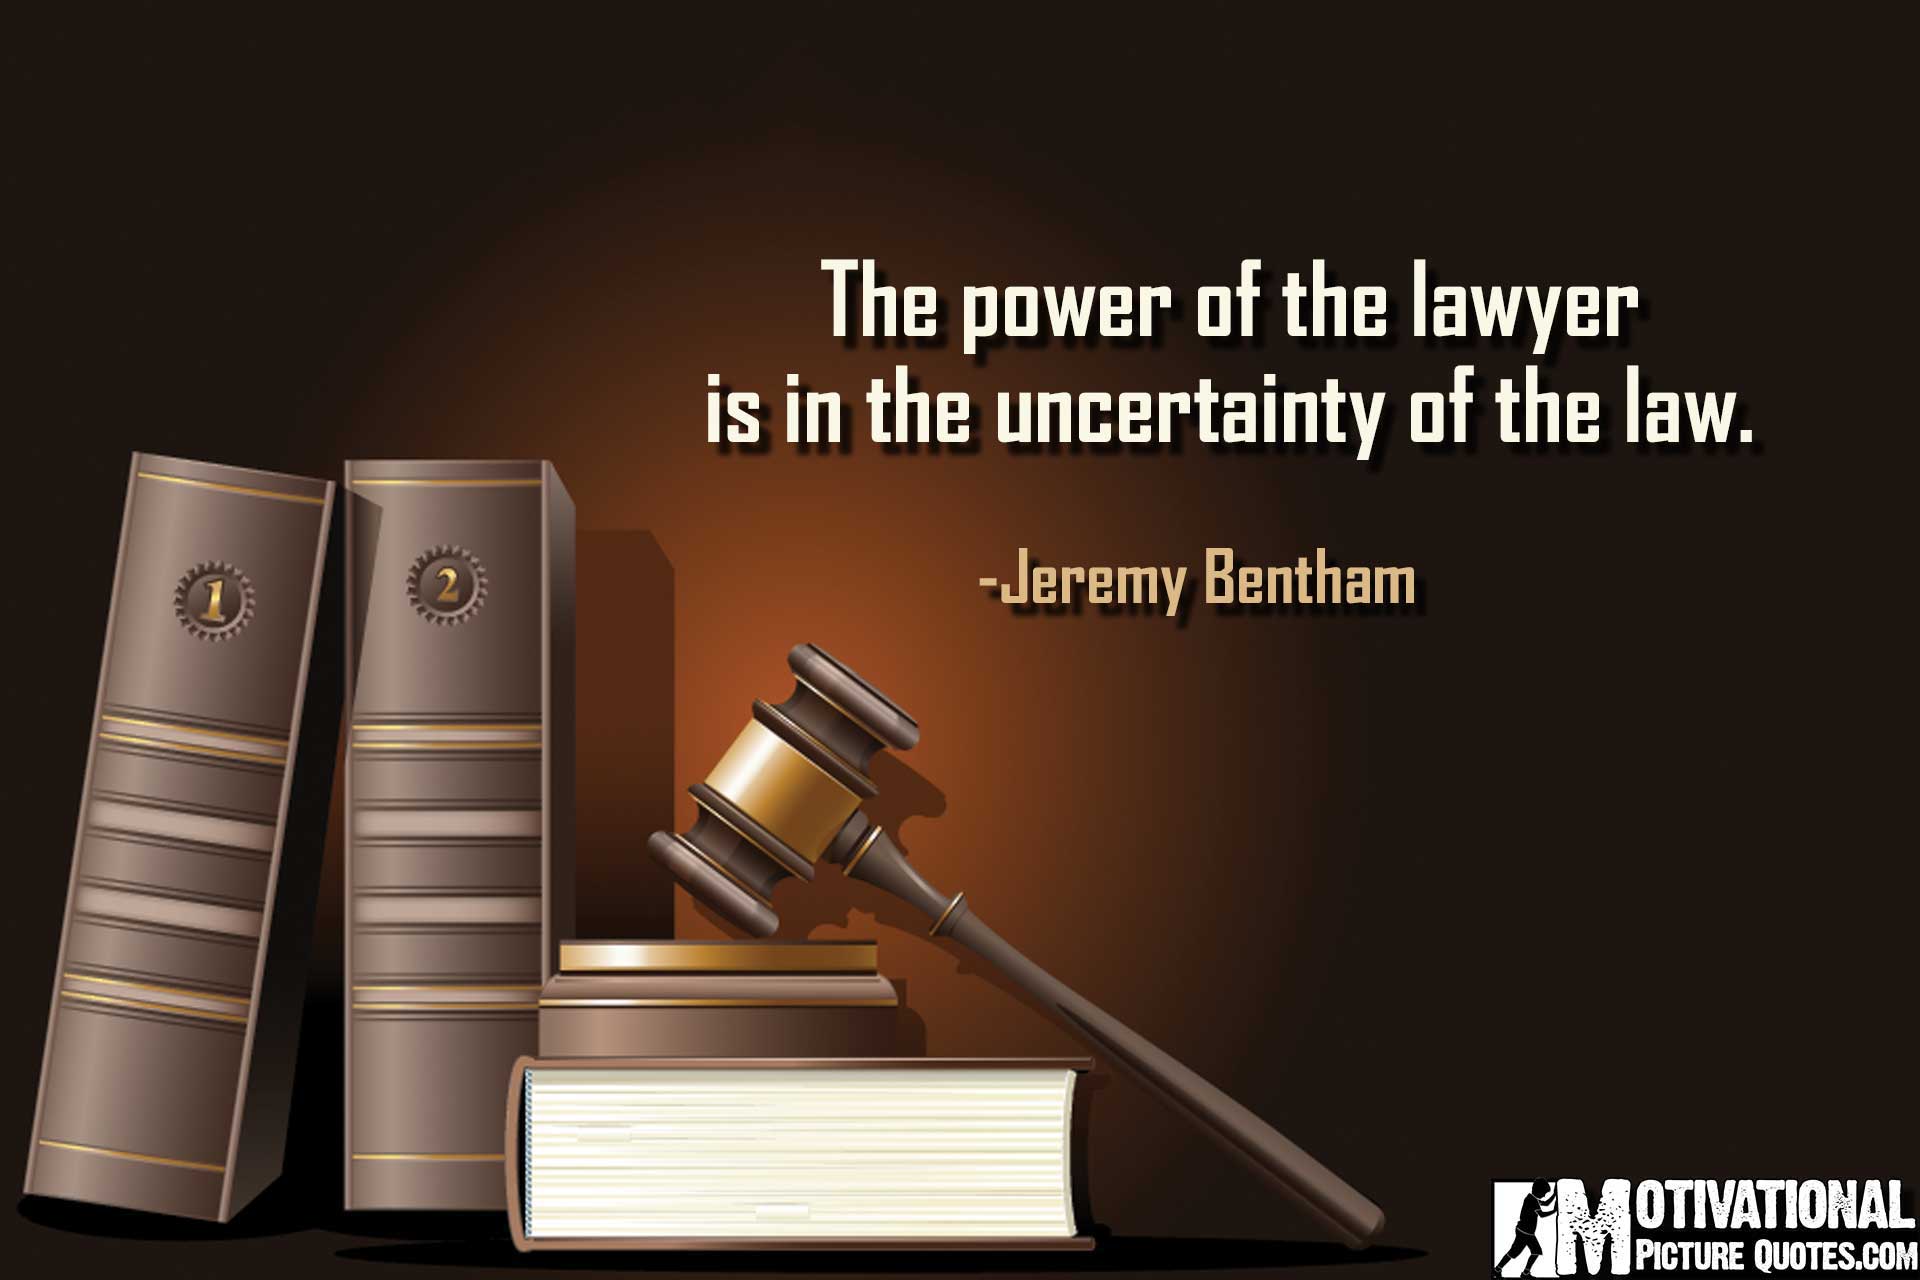 Inspirational Quotes for Law Students .insbright.com